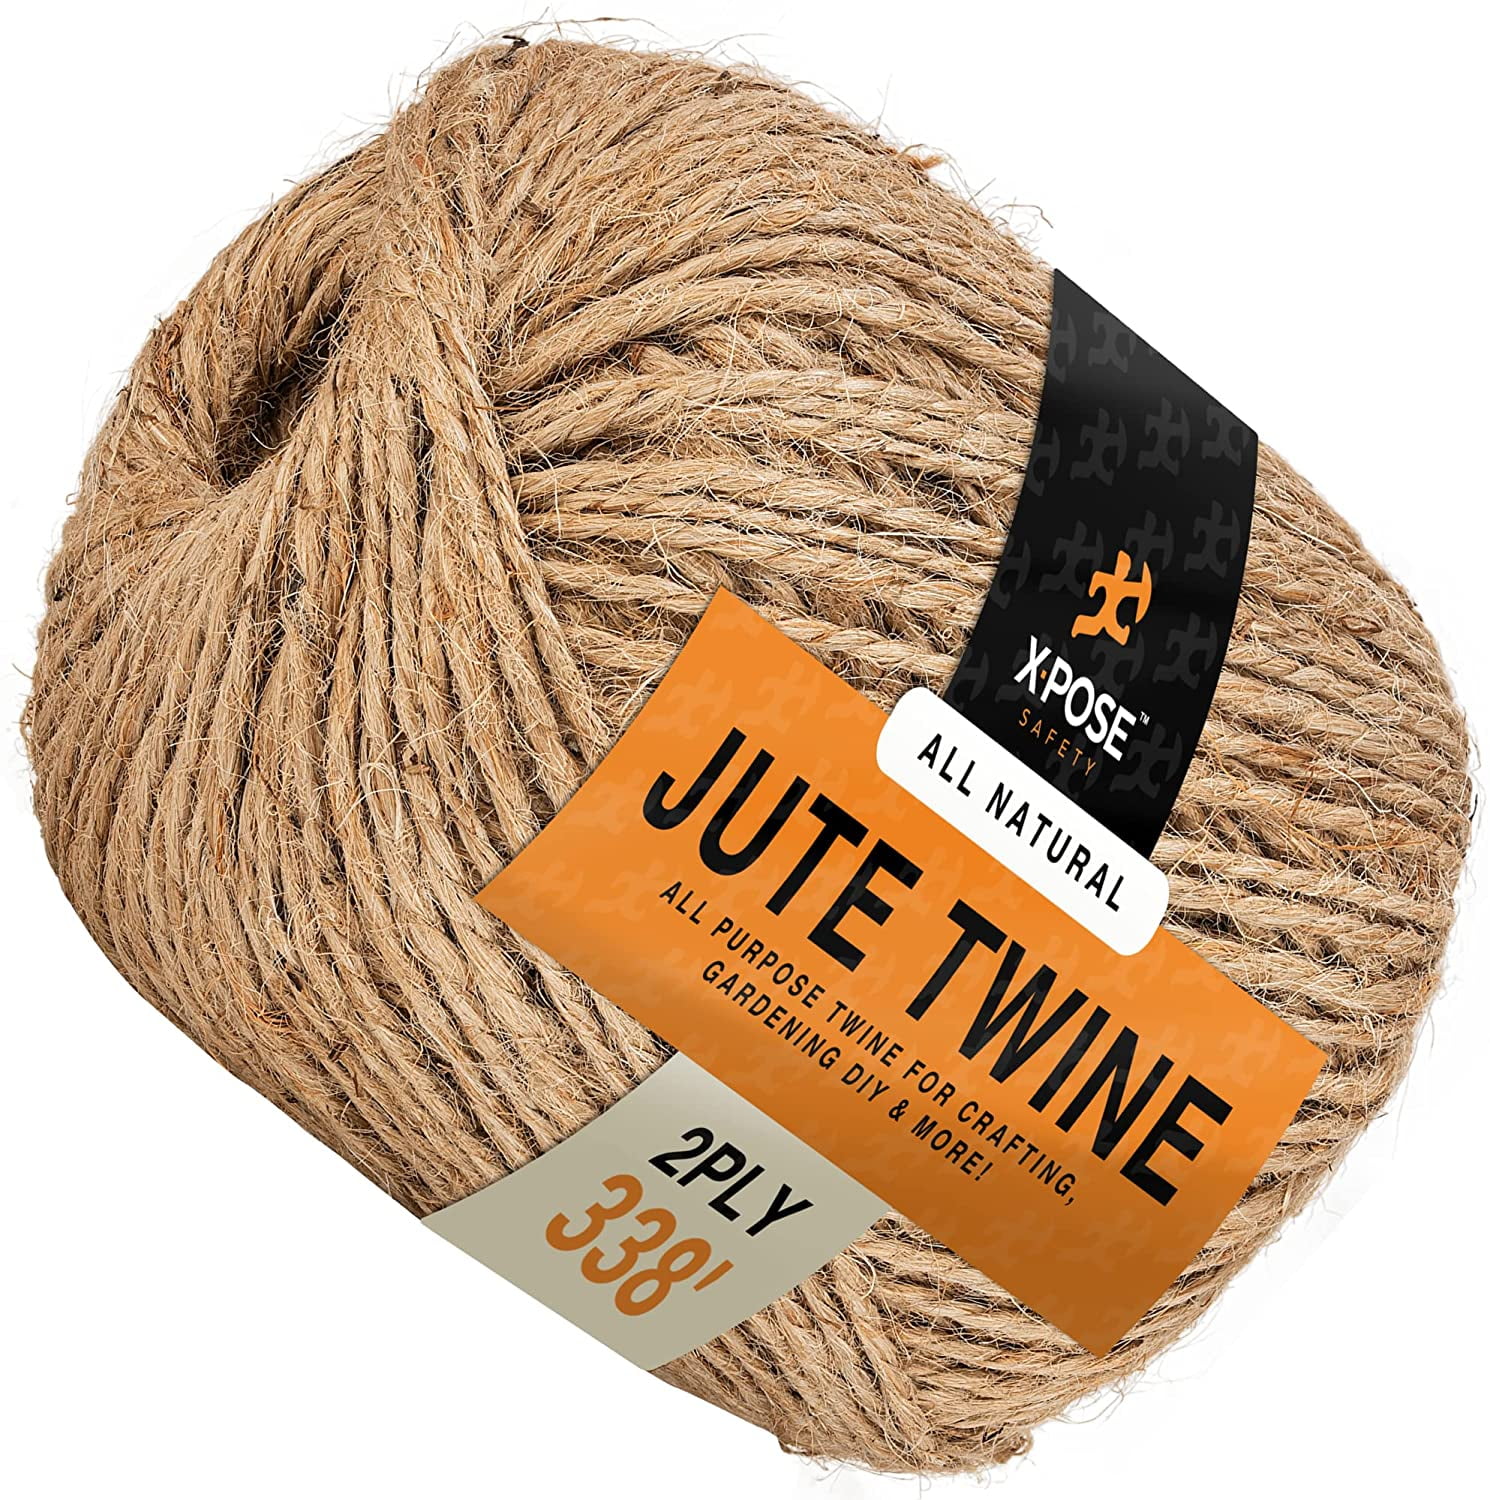 jijAcraft Jute Rope 3/8 inch, 33 Feet x 10mm Thick Jute Rope, Nautical Rope, Heavy Duty Strong Jute Twine, Natural Thick Twine Rope for Crafts, Cat